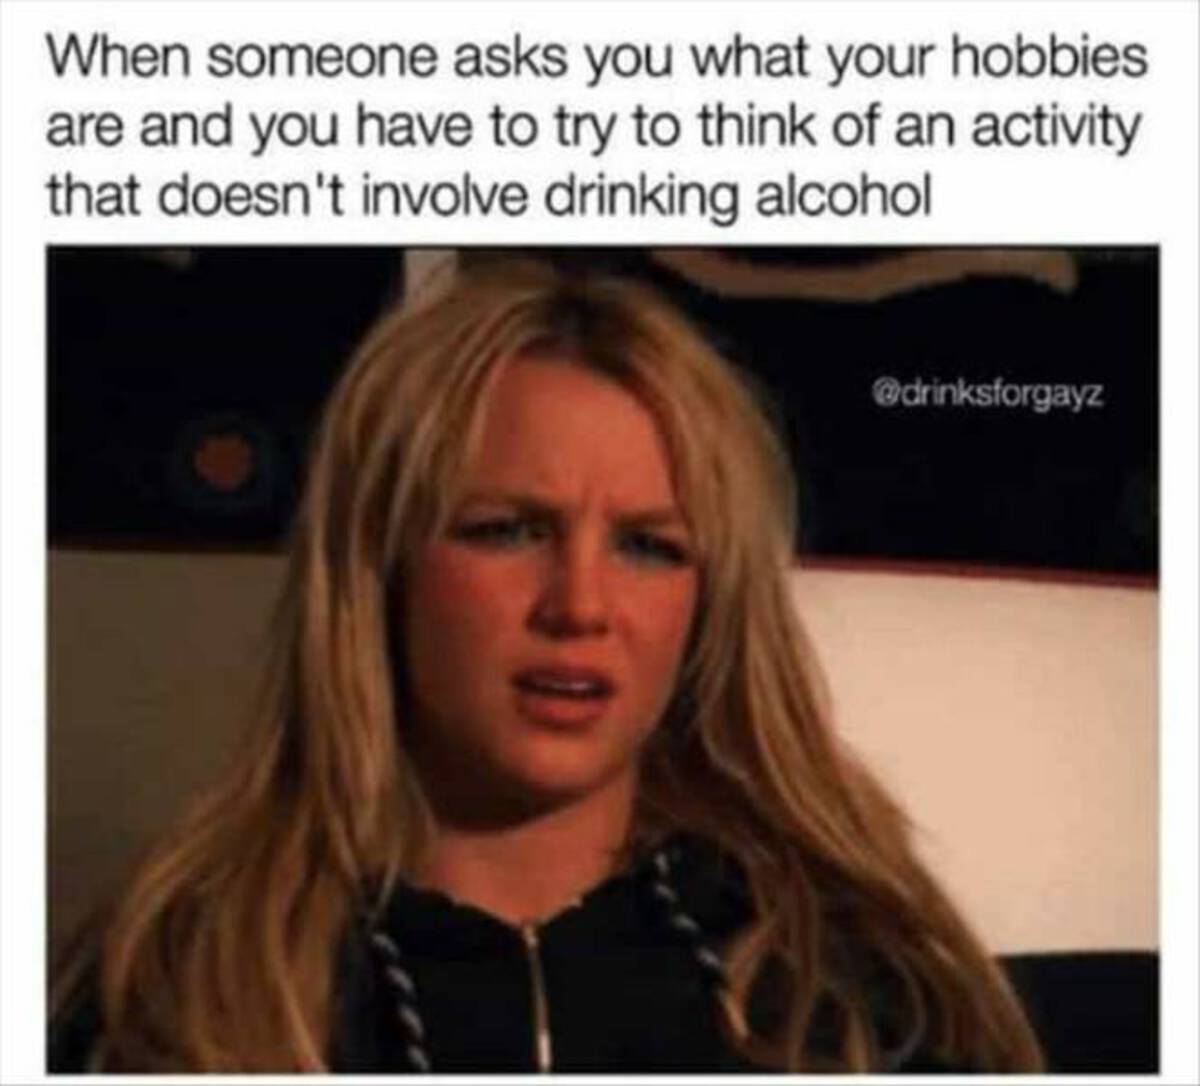 confused stare gif - When someone asks you what your hobbies are and you have to try to think of an activity that doesn't involve drinking alcohol